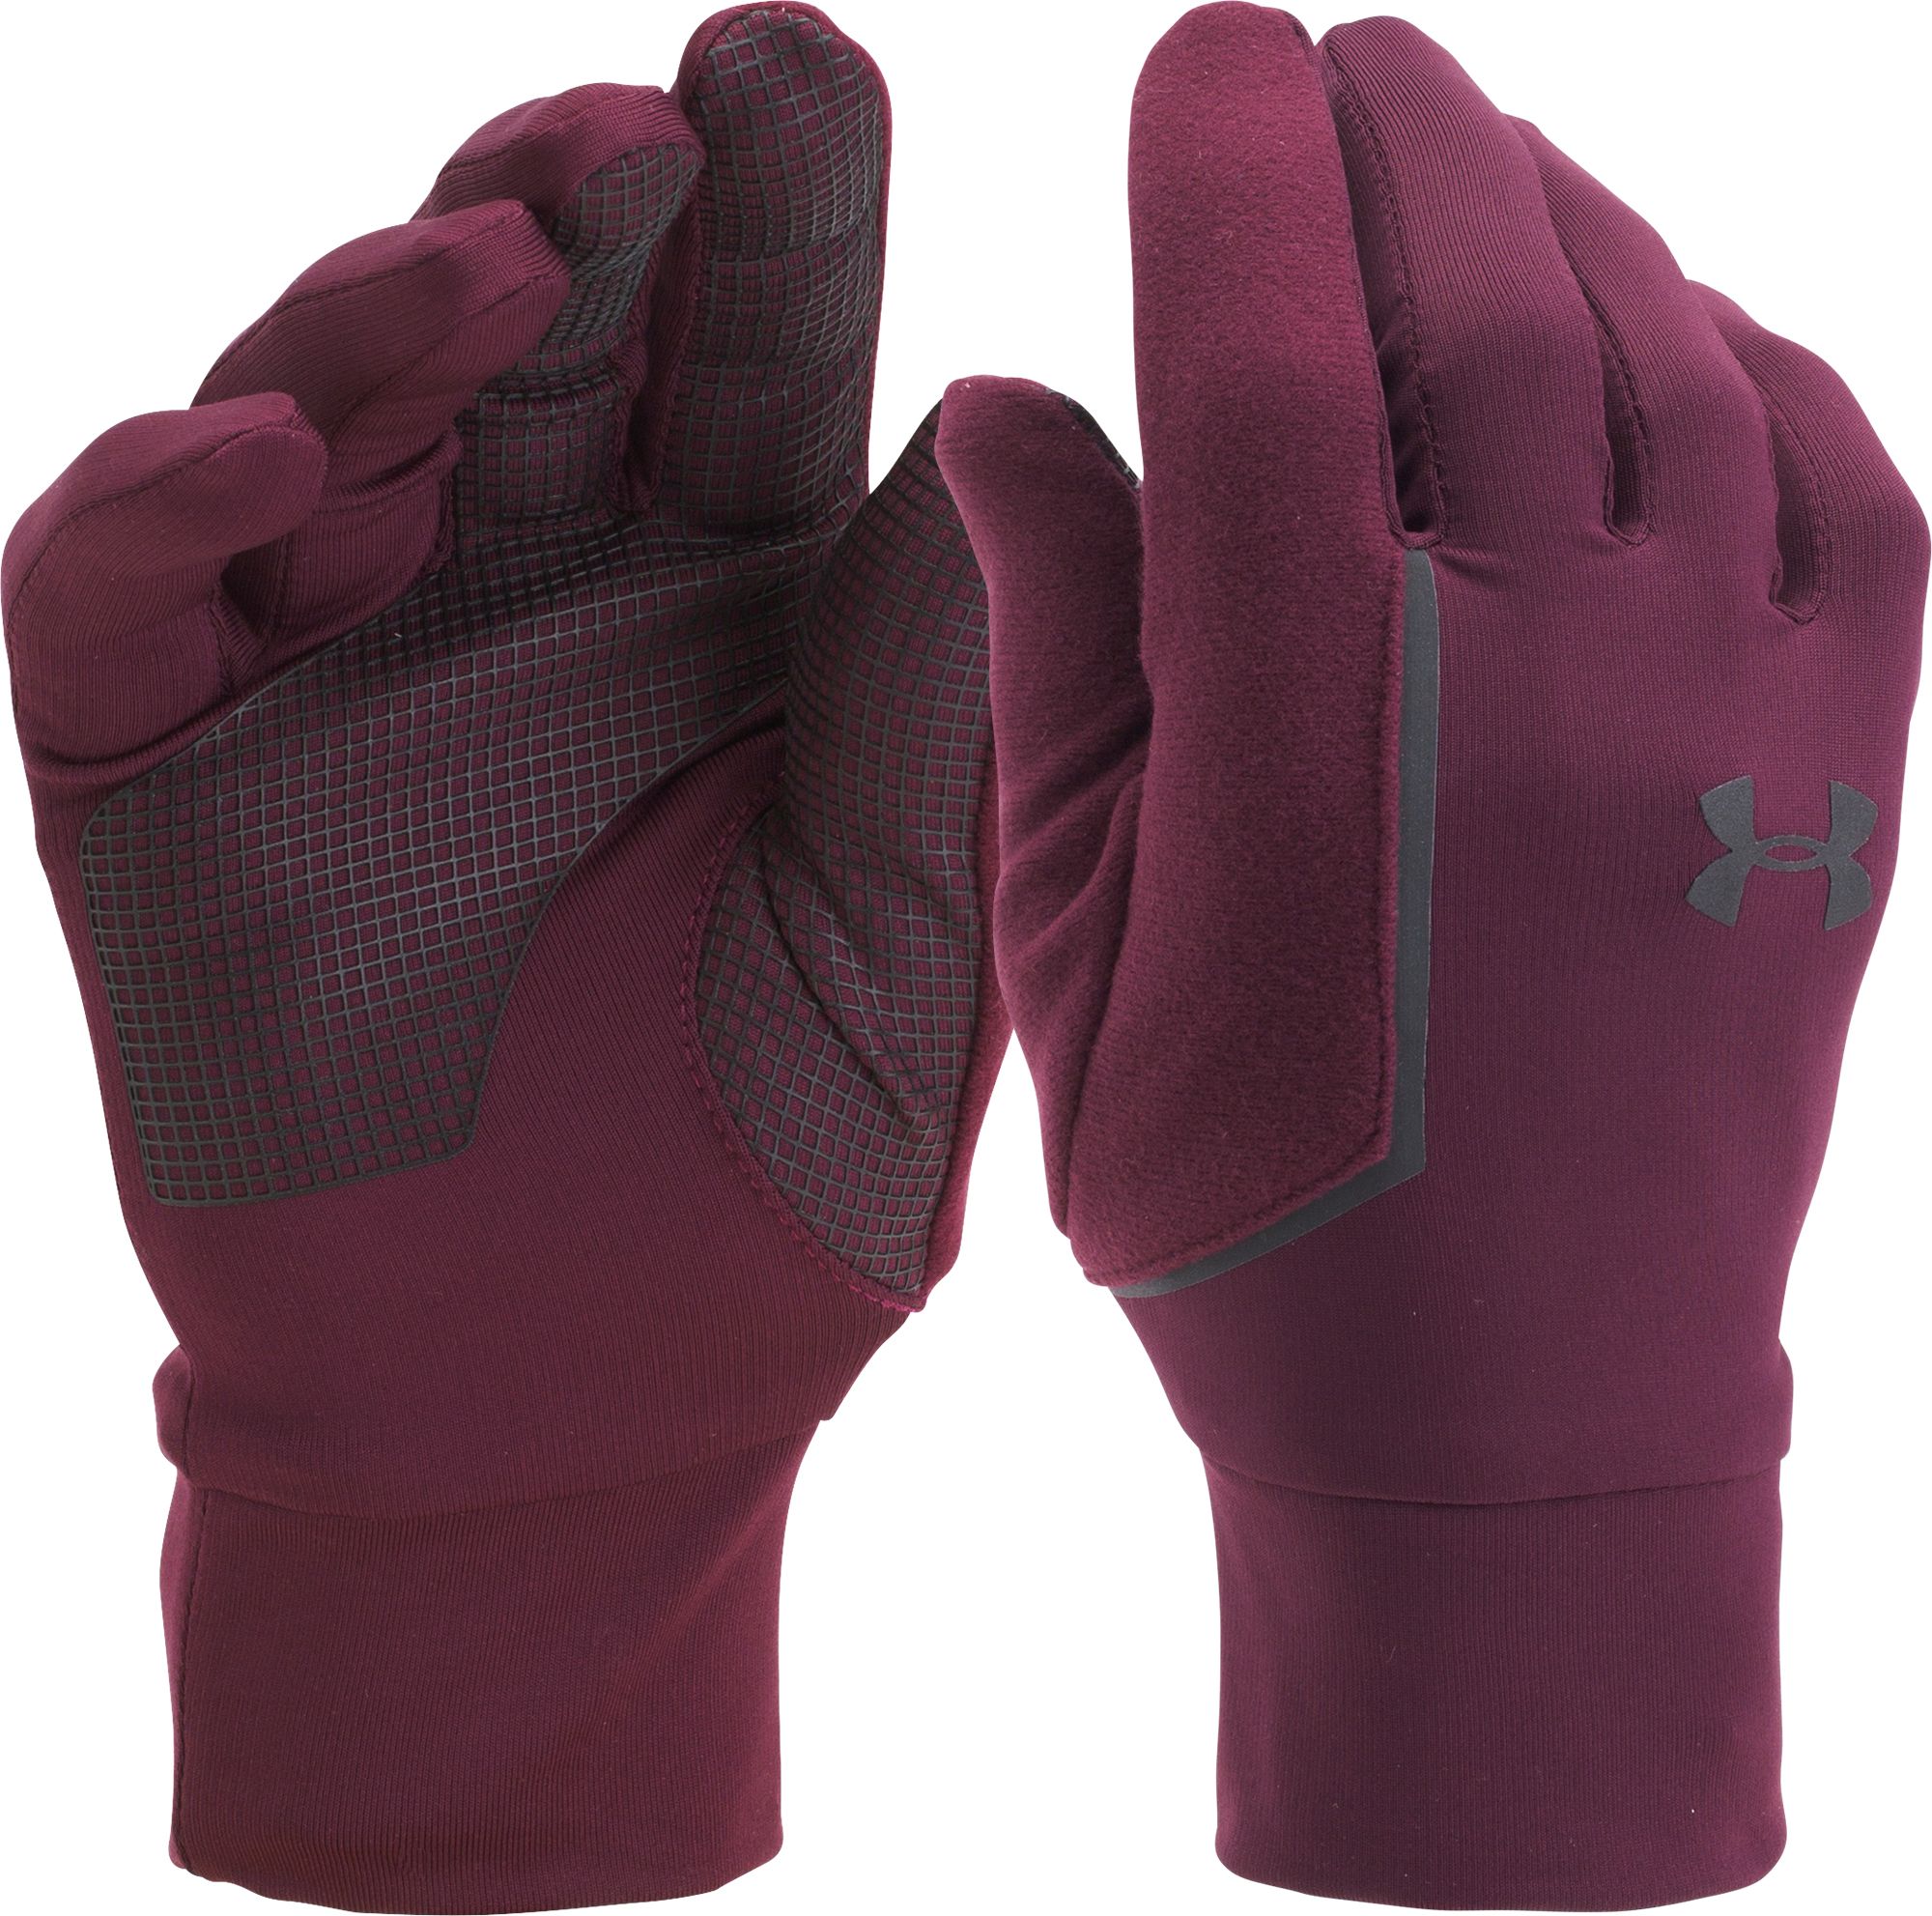 No Breaks Armour Liner Gloves 